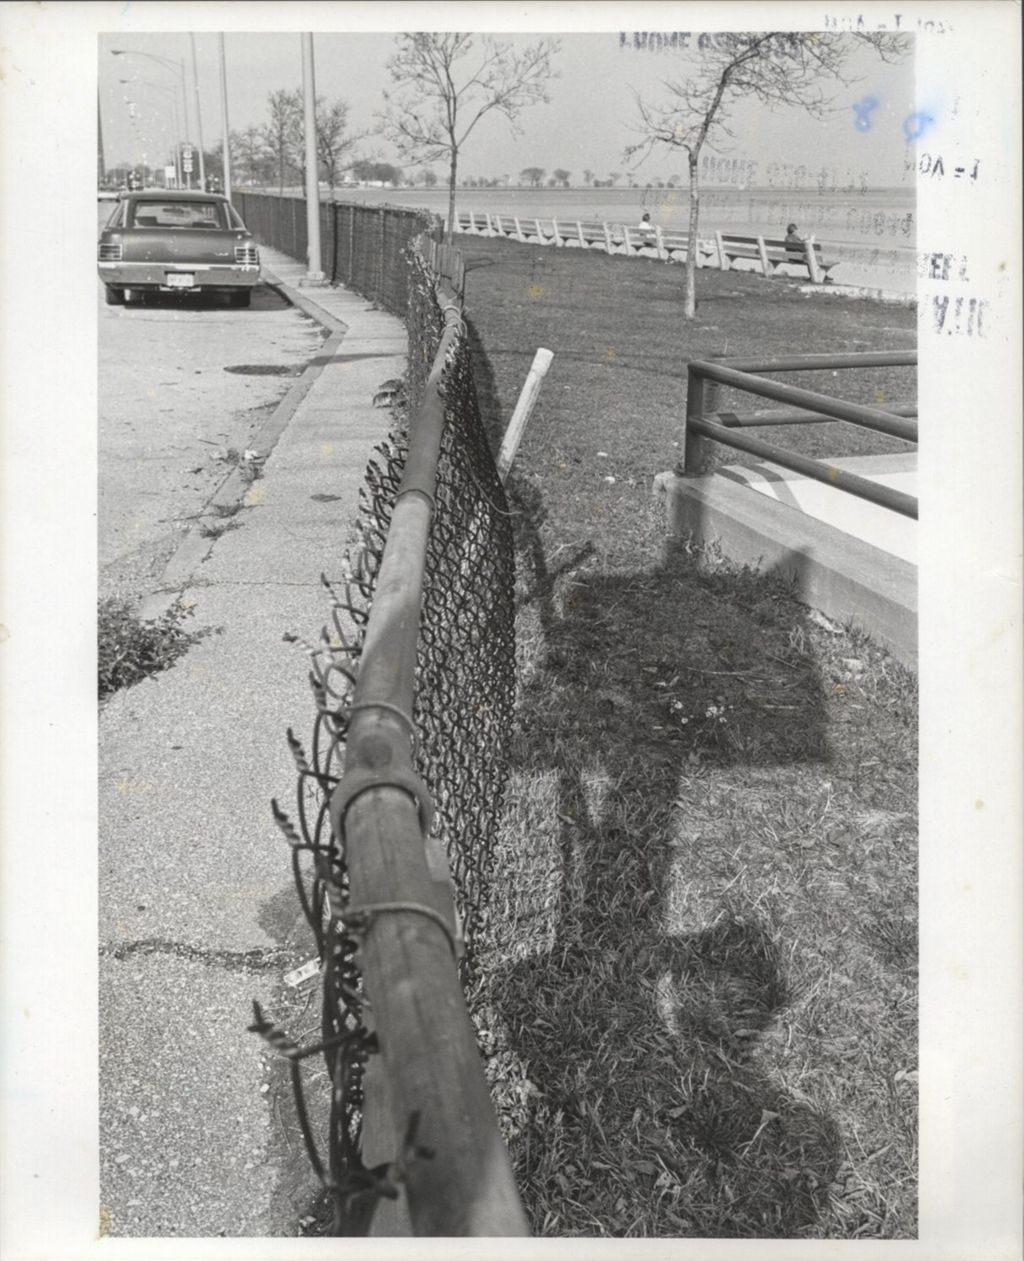 Highway view with chain-link fence